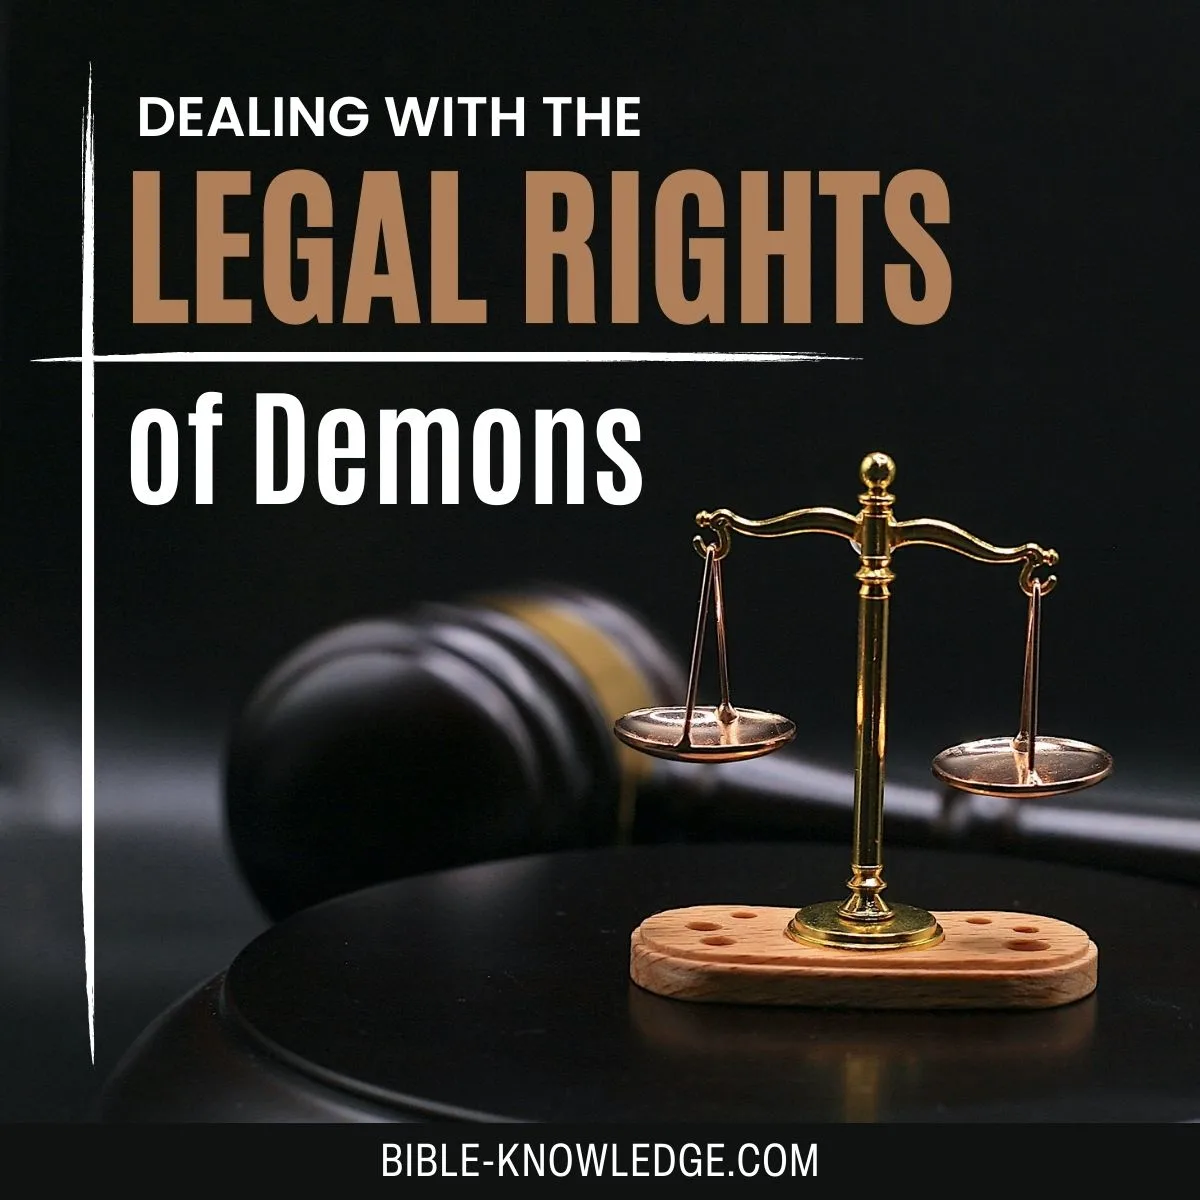 Dealing with the Legal Rights of Demons